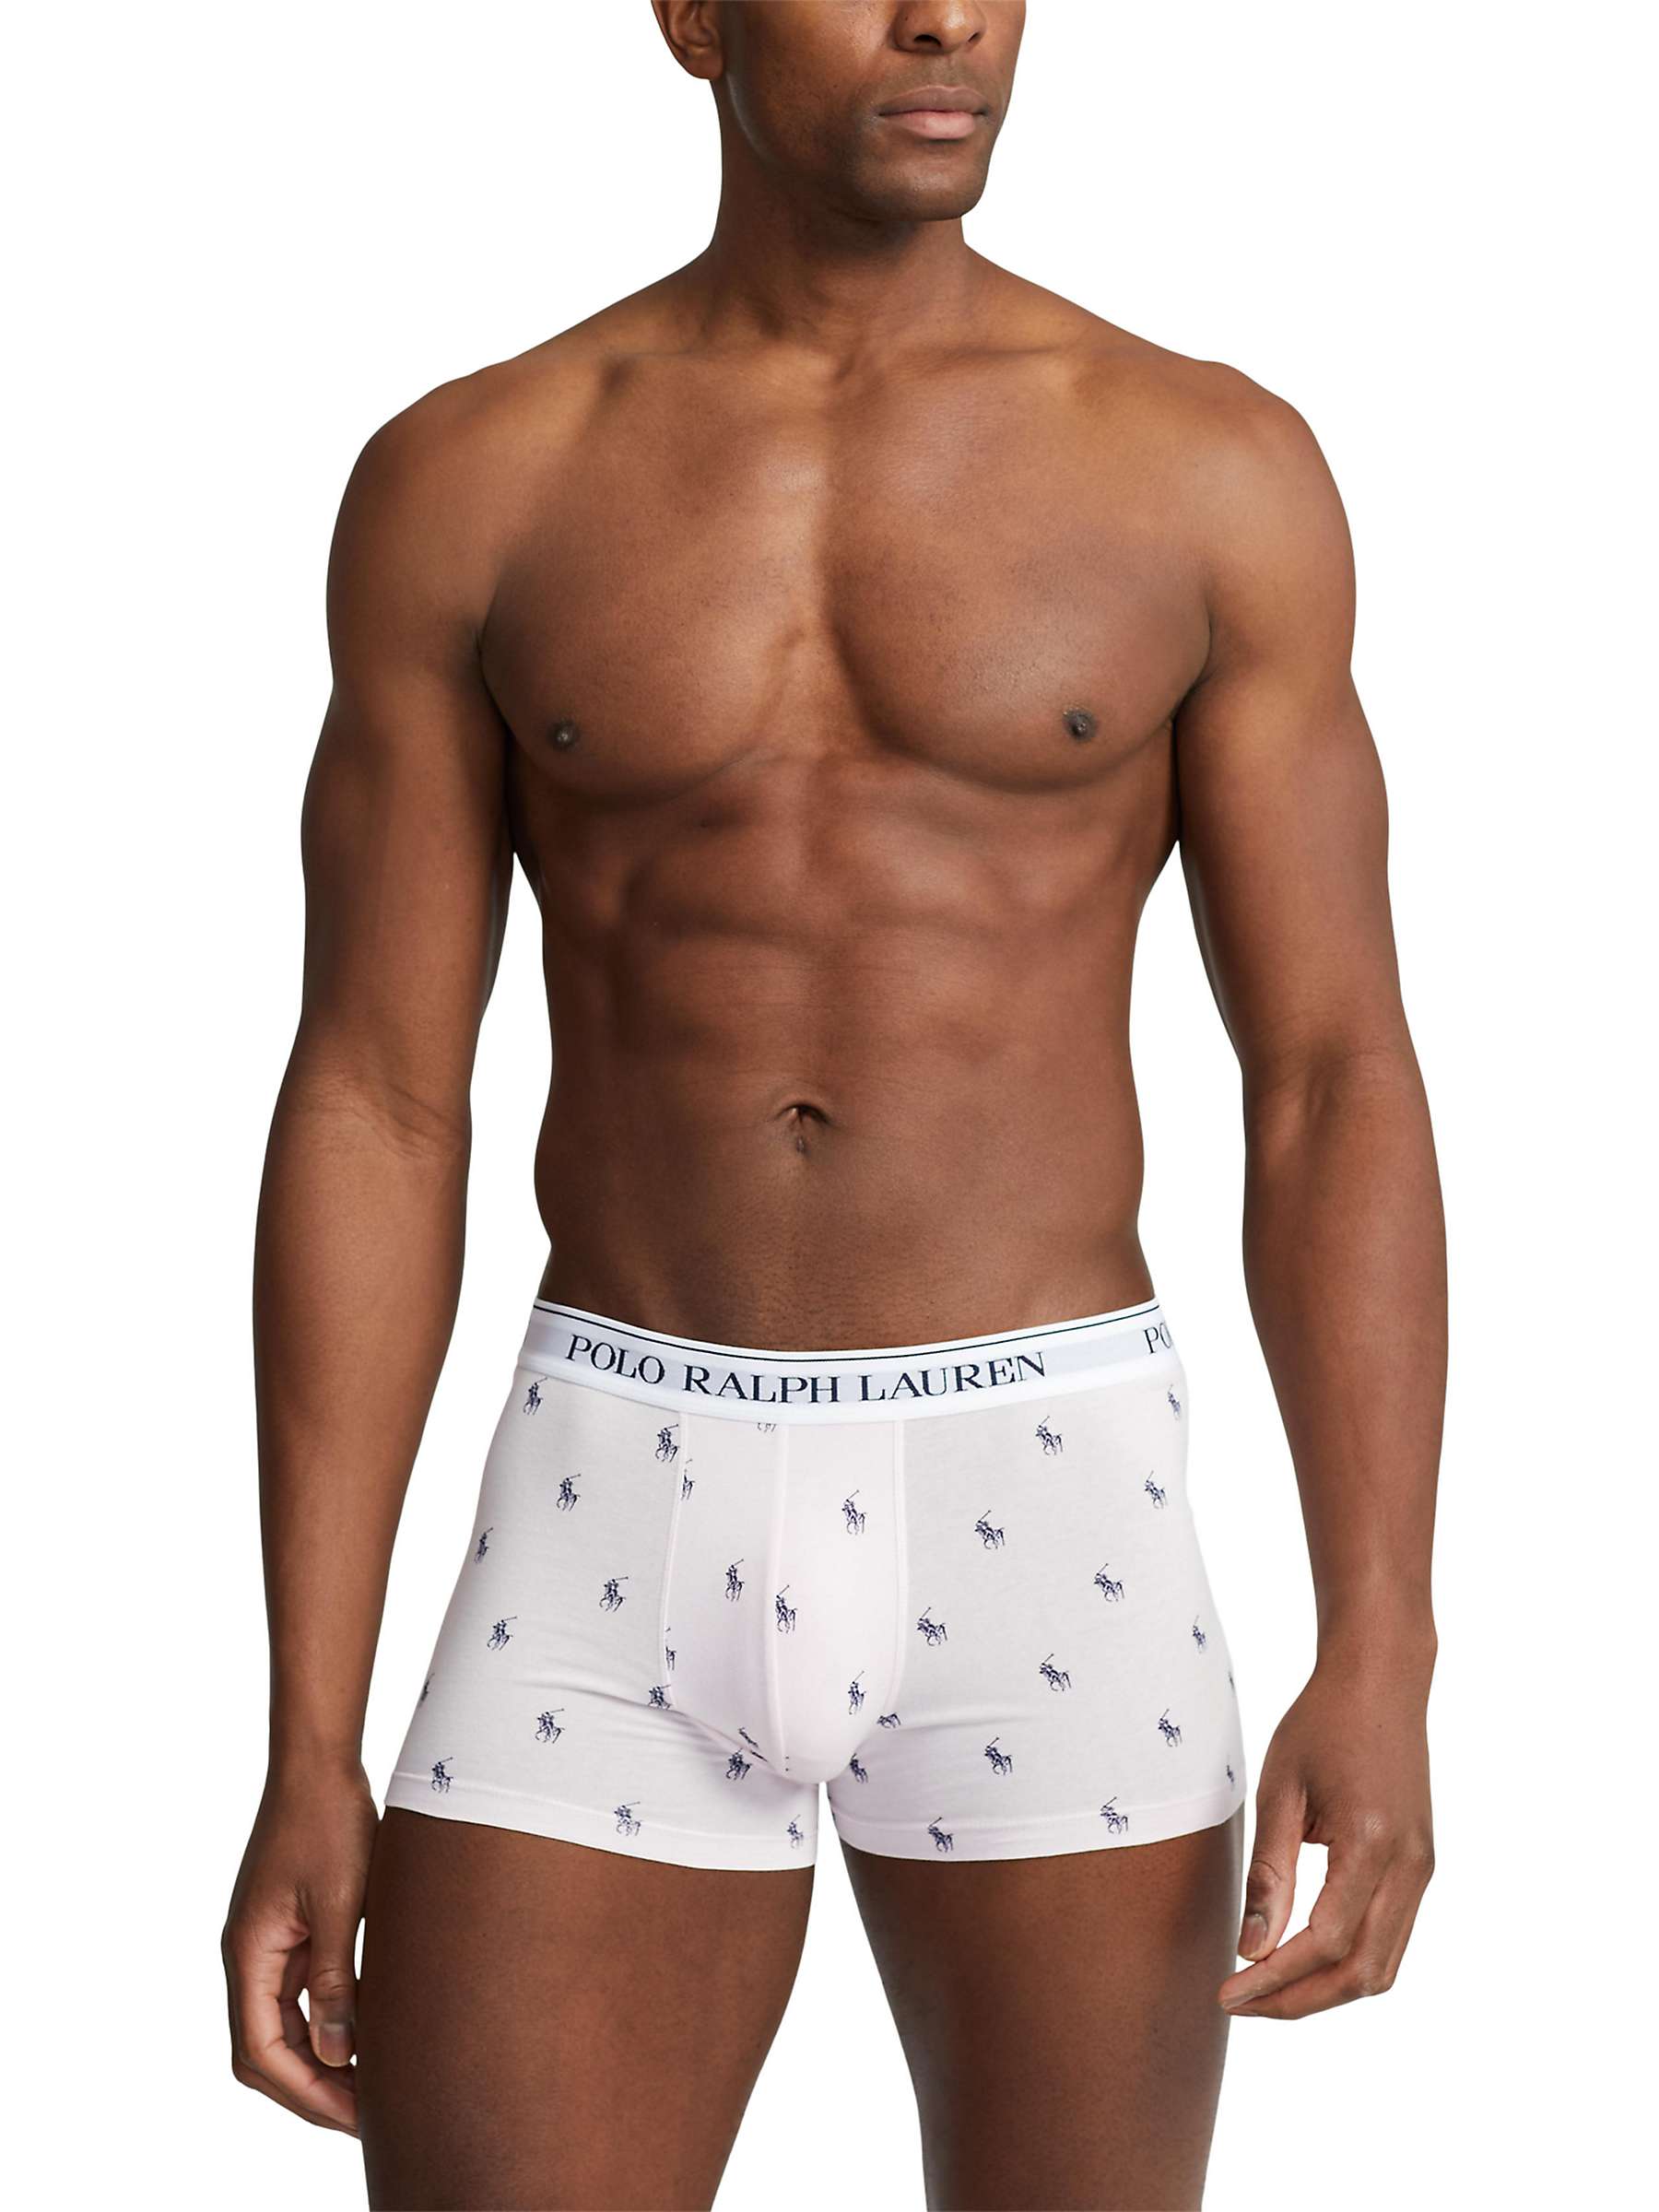 Buy Polo Ralph Lauren Stretch Cotton Trunks, Pack of 3, Multi Online at johnlewis.com